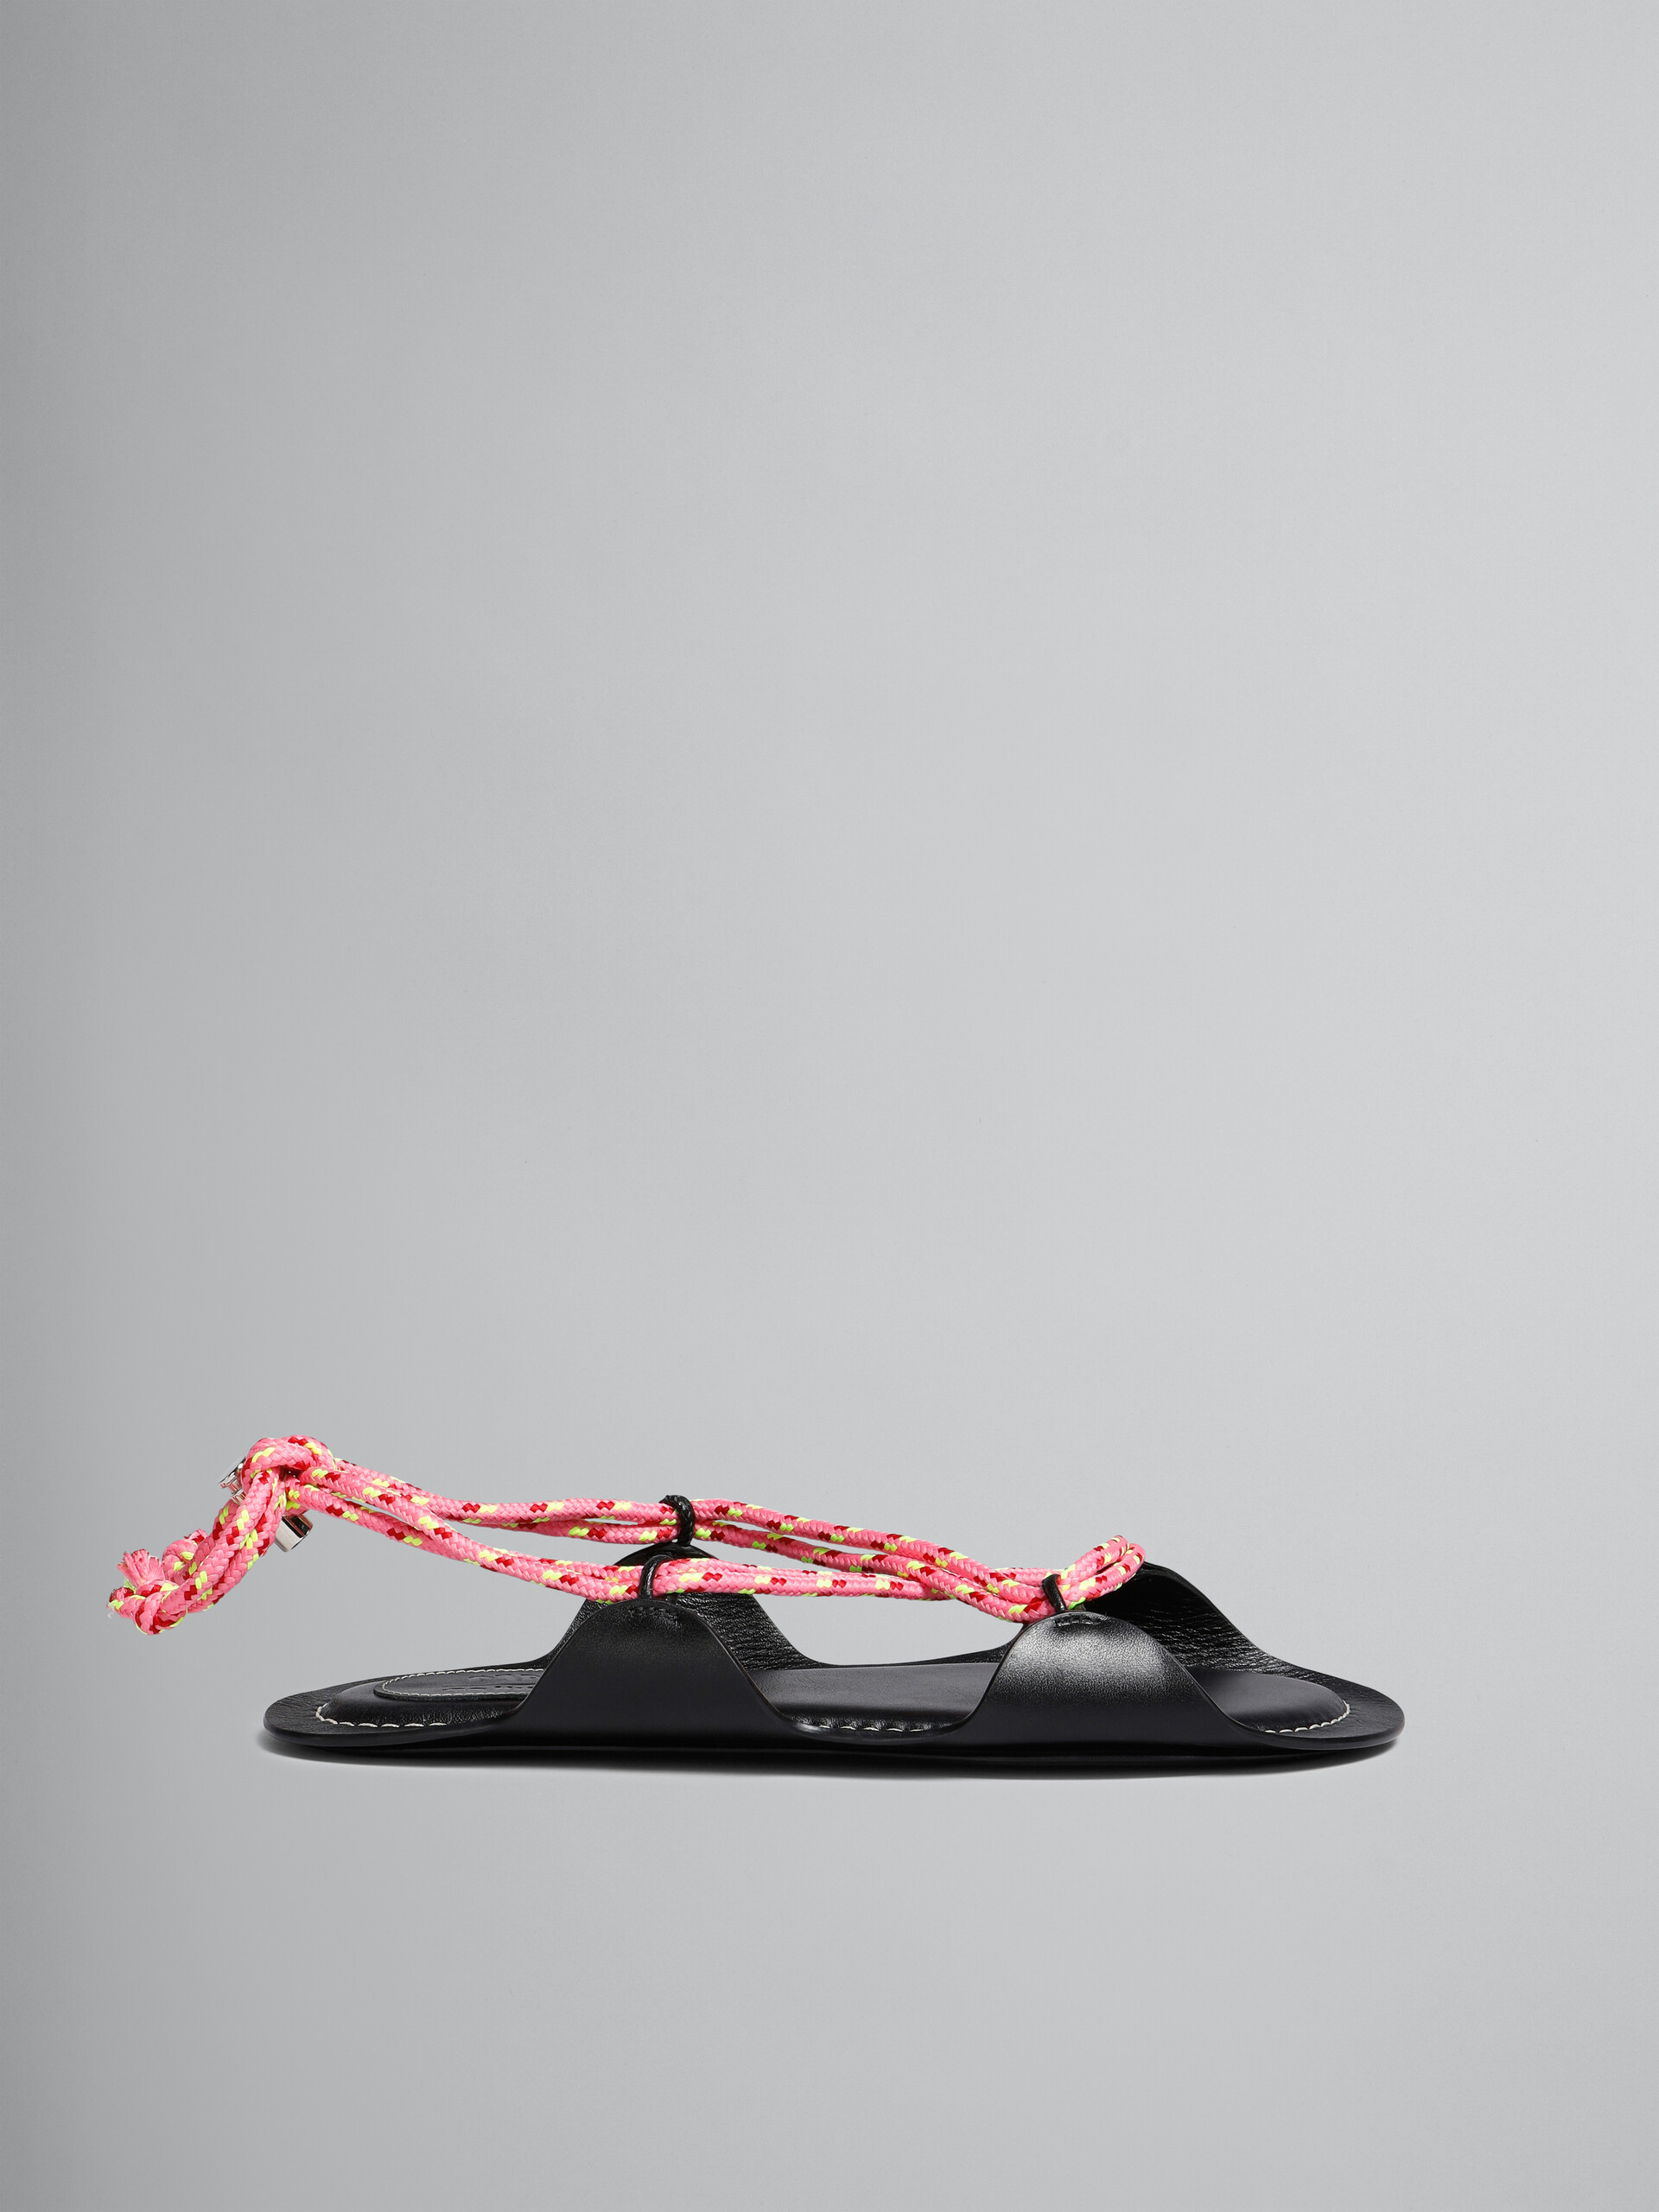 Marni x No Vacancy Inn - Black leather sandals with multicolour rope - Sandals - Image 1